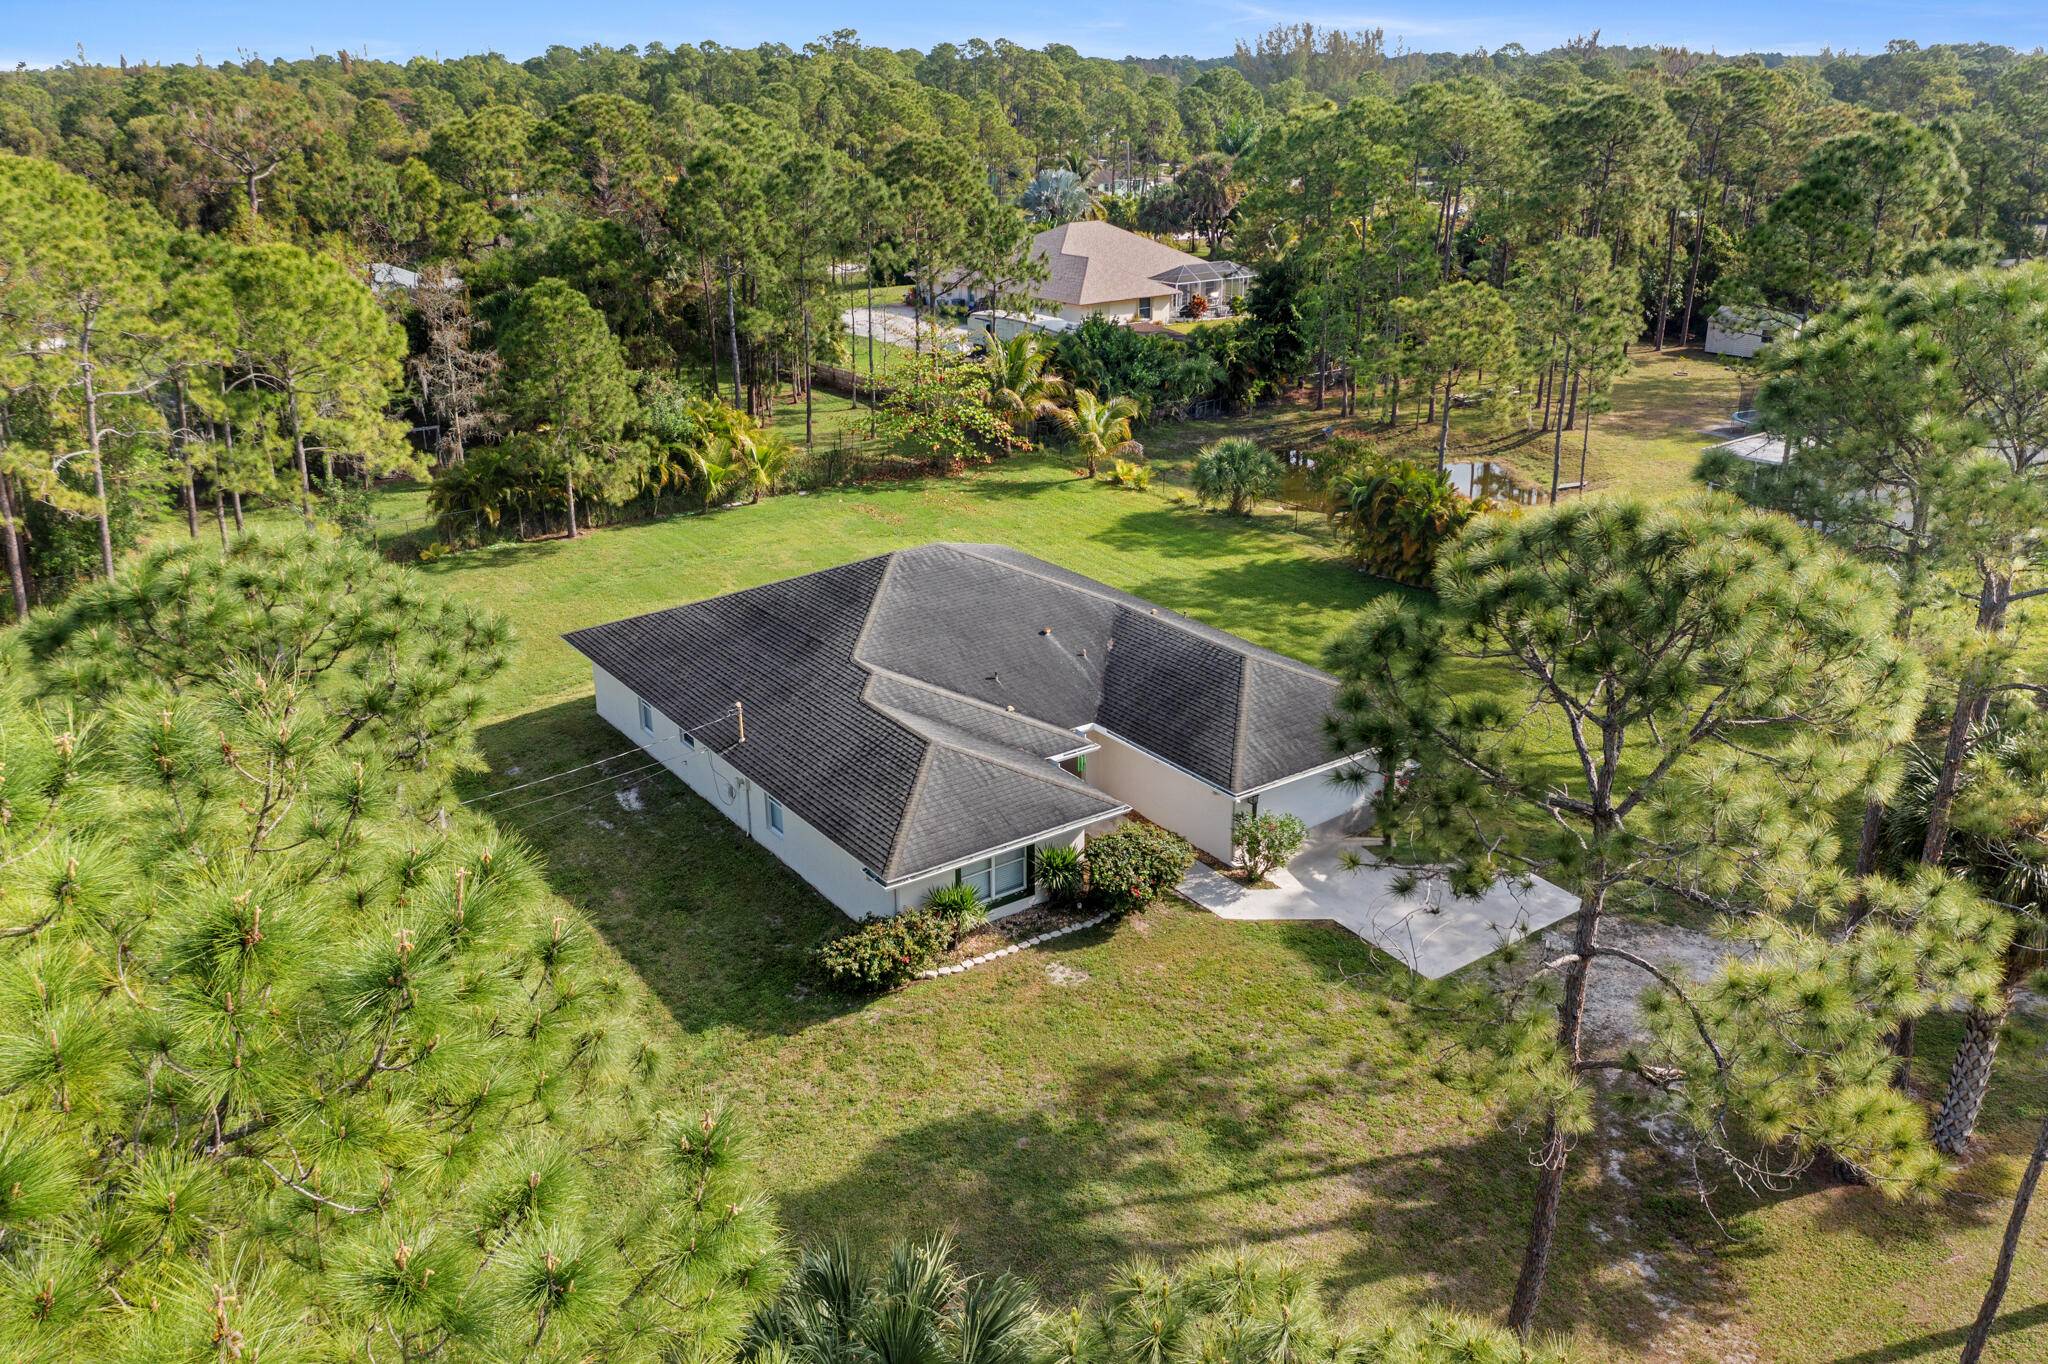 Nestled in the peaceful Loxahatchee, Florida, this exquisite detached home offers the perfect blend of luxury, comfort, and tranquility sitting on a 1.